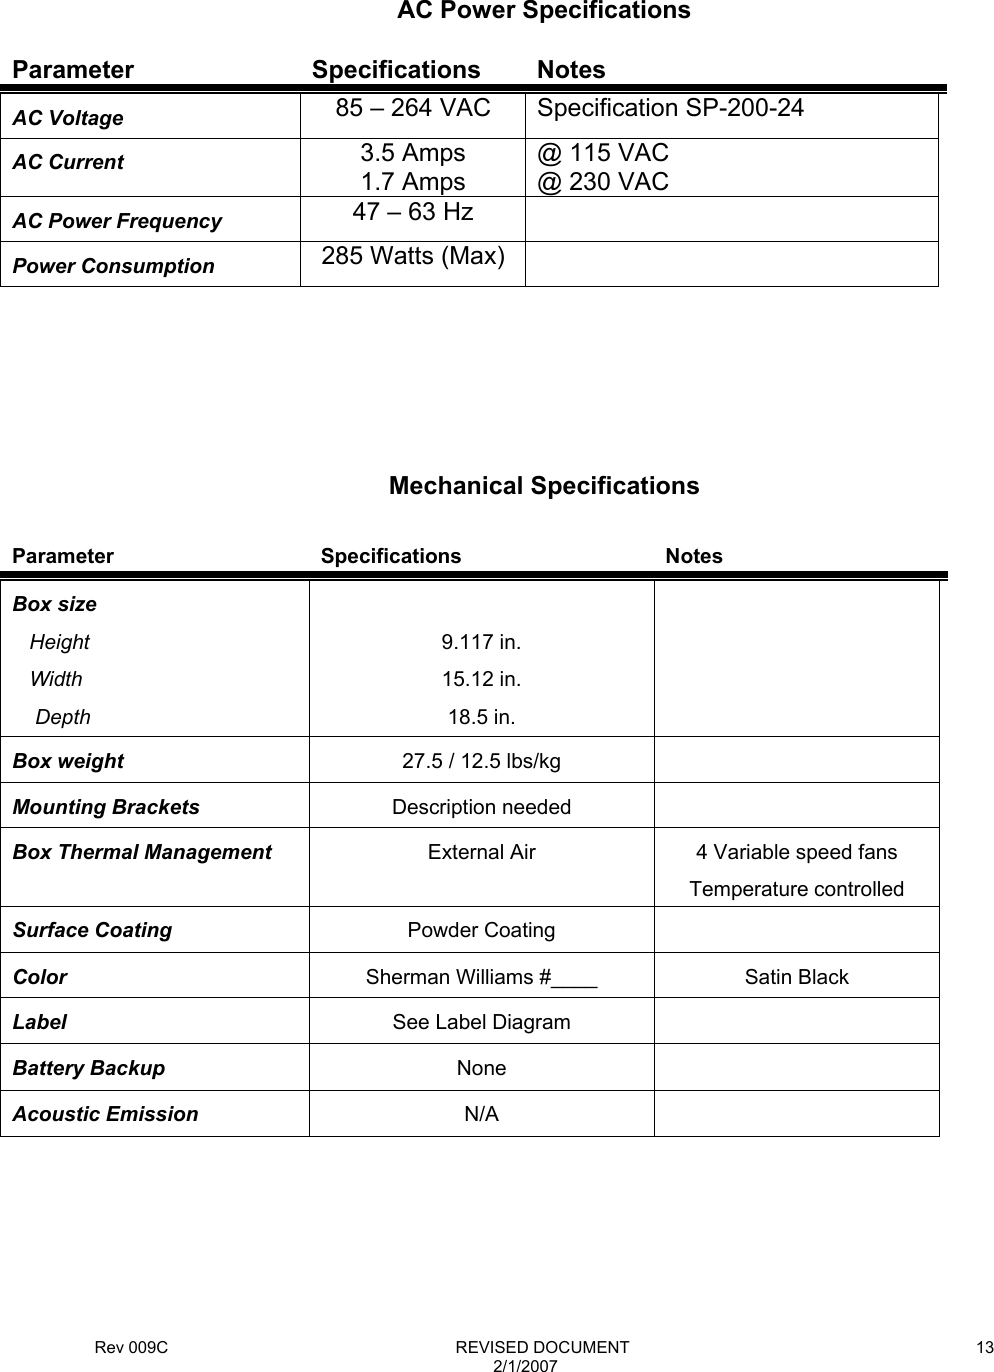 Rev 009C                                                              REVISED DOCUMENT 2/1/2007 13     Parameter Specifications Notes AC Voltage  85 – 264 VAC  Specification SP-200-24 AC Current   3.5 Amps 1.7 Amps @ 115 VAC @ 230 VAC AC Power Frequency  47 – 63 Hz   Power Consumption  285 Watts (Max)         Parameter Specifications Notes Box size    Height    Width     Depth  9.117 in. 15.12 in. 18.5 in.  Box weight  27.5 / 12.5 lbs/kg   Mounting Brackets  Description needed   Box Thermal Management  External Air  4 Variable speed fans Temperature controlled Surface Coating  Powder Coating   Color  Sherman Williams #____  Satin Black Label  See Label Diagram   Battery Backup  None  Acoustic Emission  N/A       AC Power Specifications Mechanical Specifications 